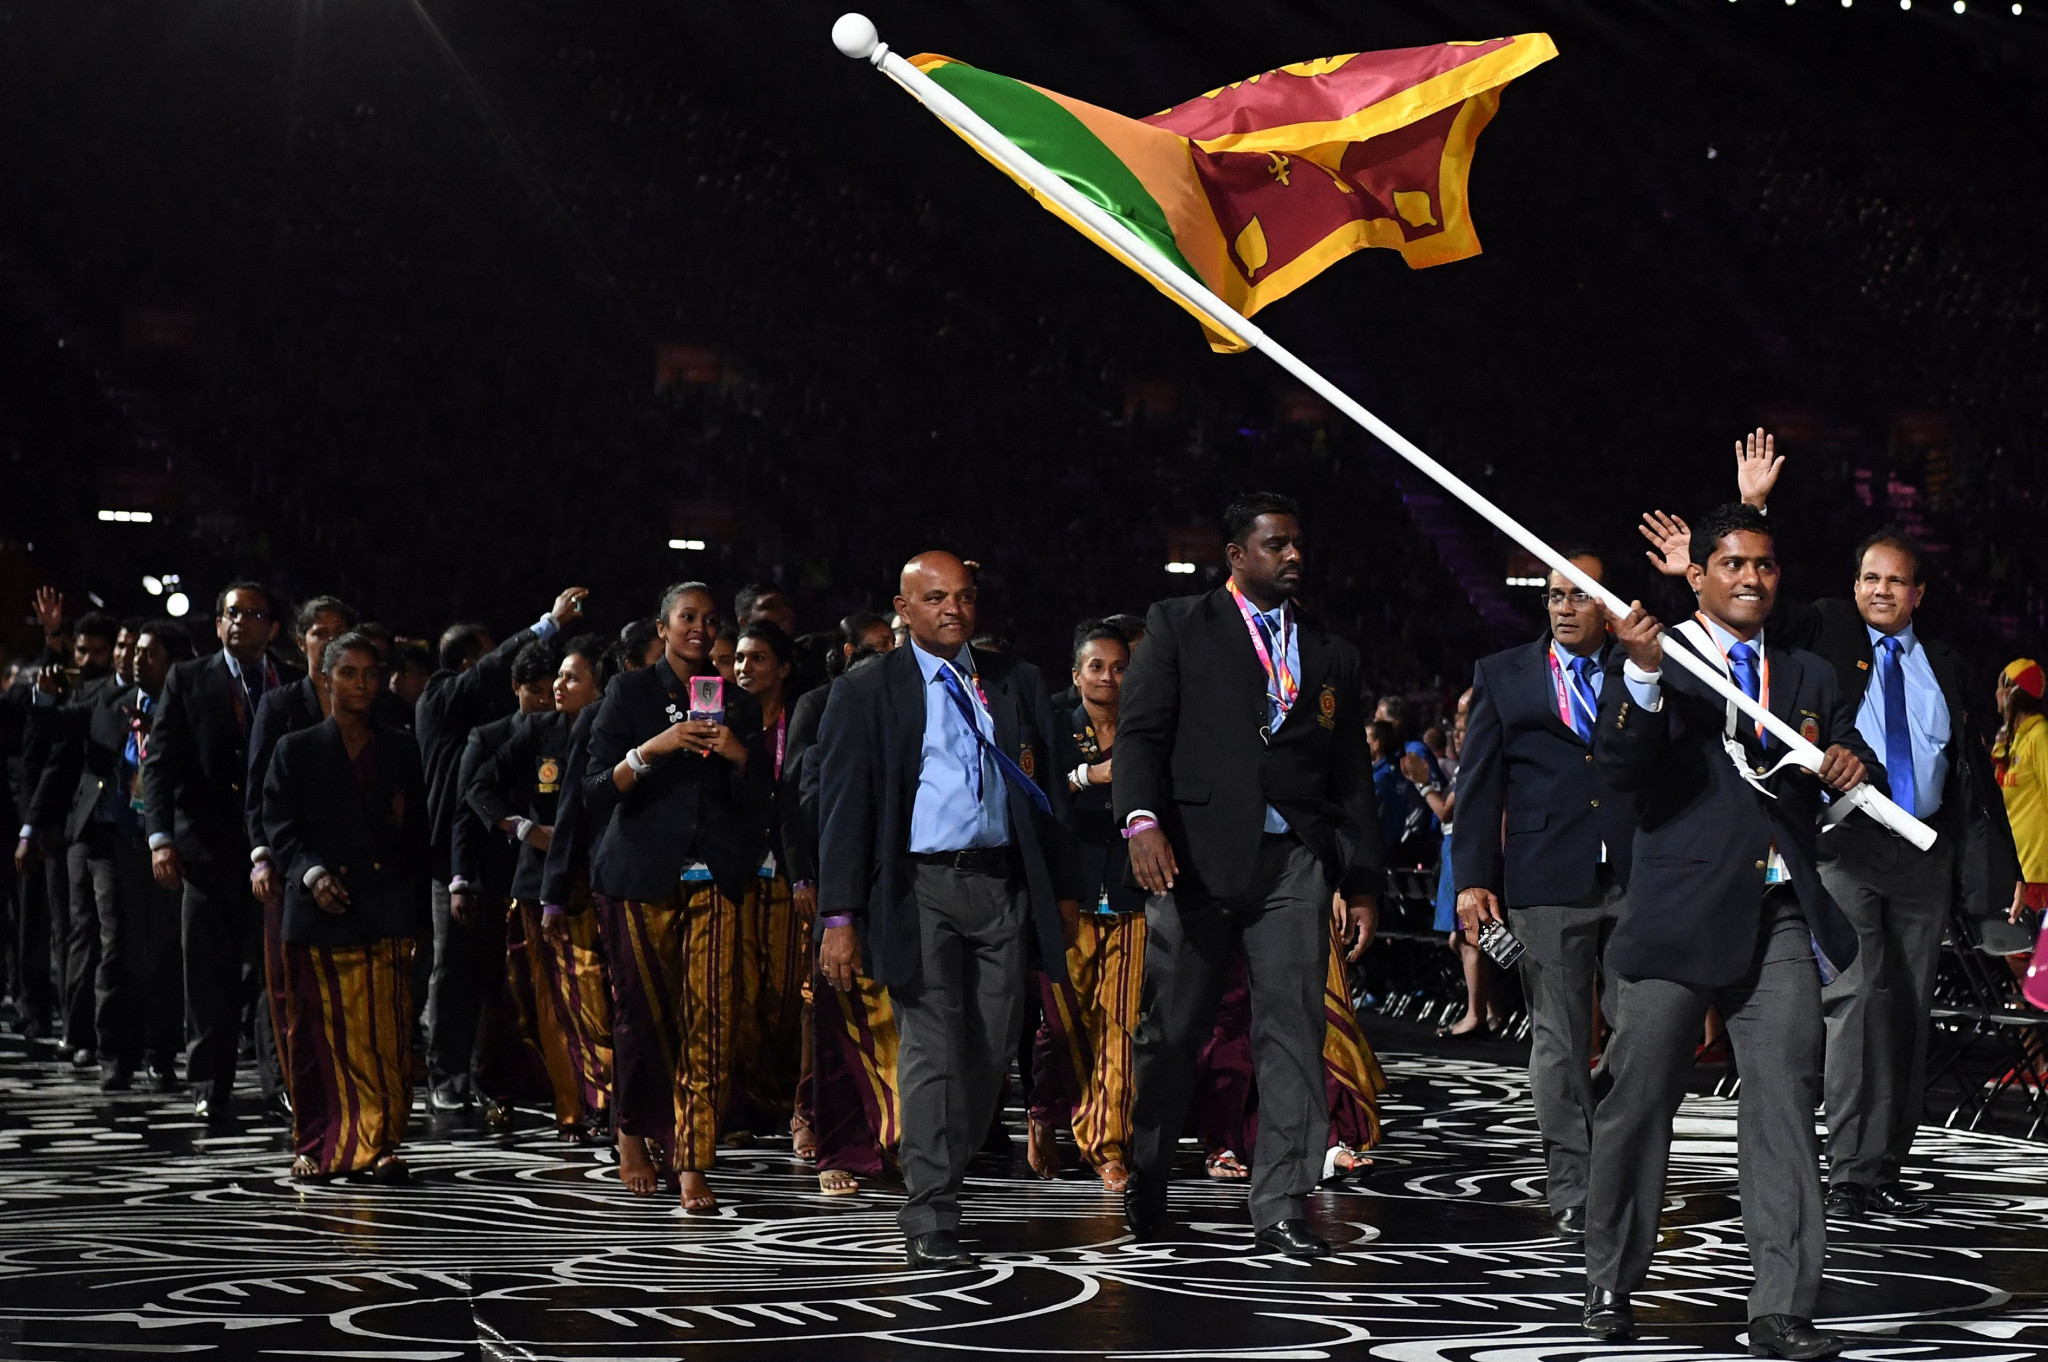 Sri Lanka to compete in record number of sports at Asian Games